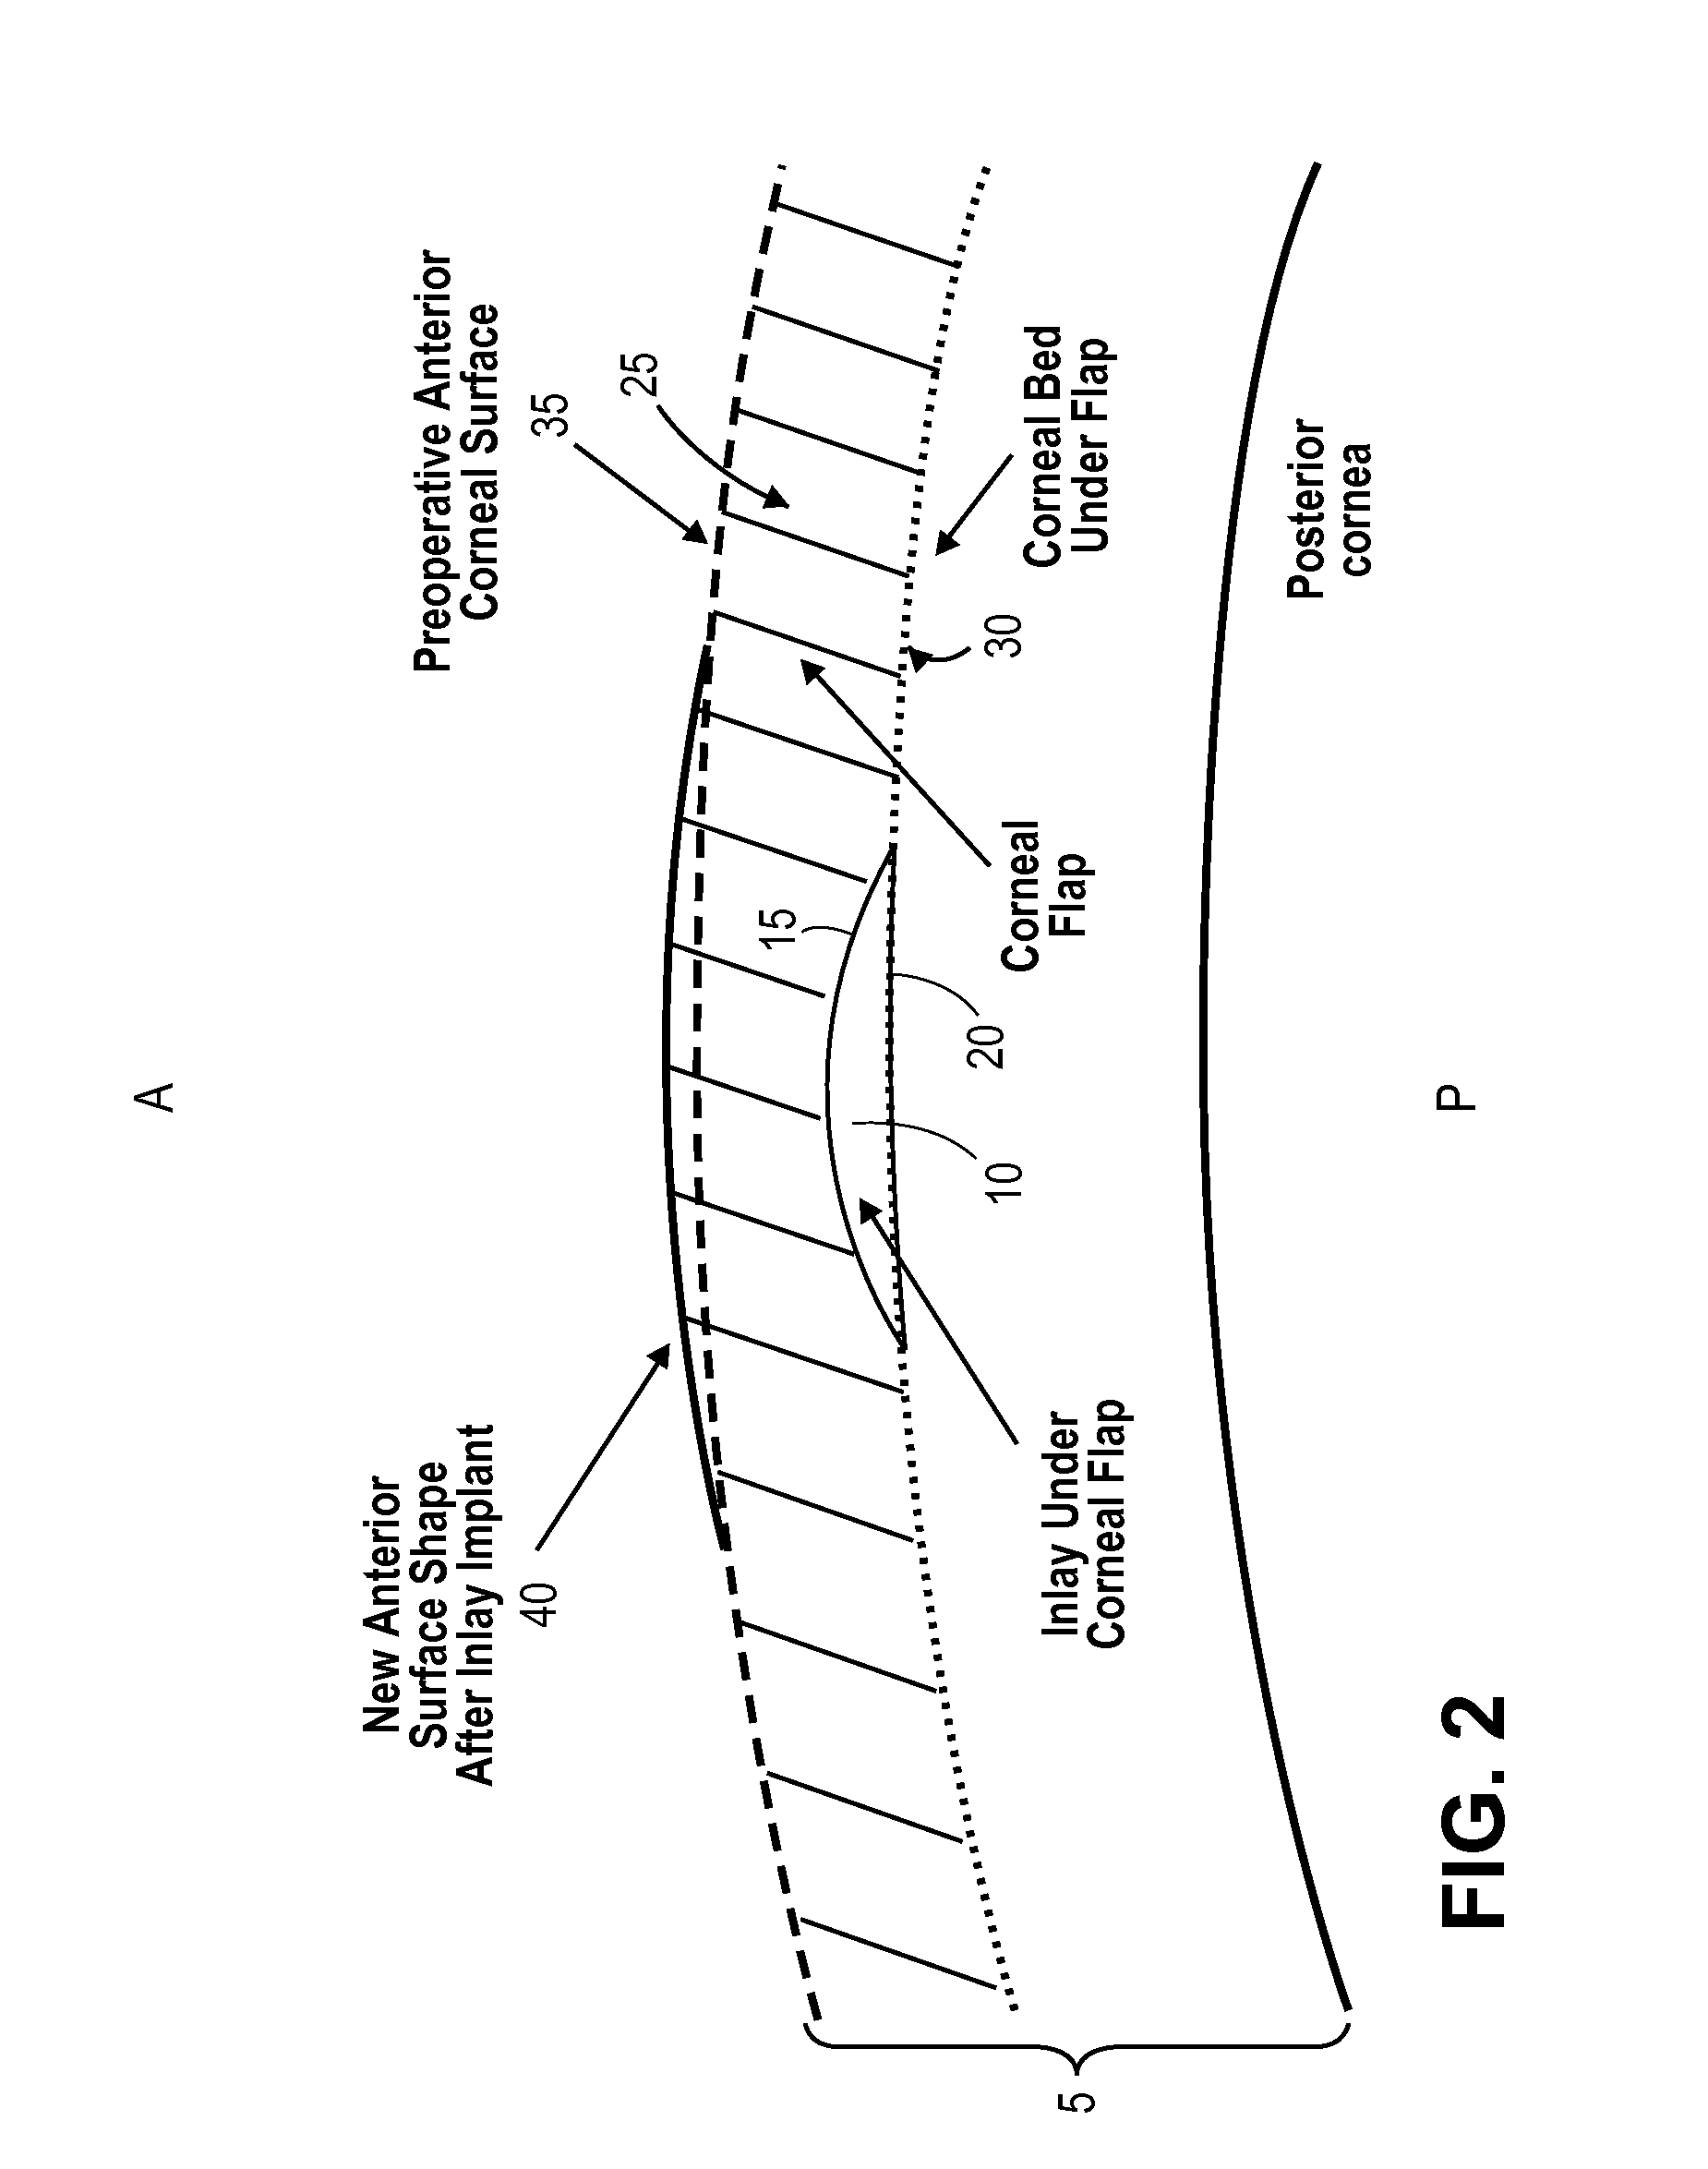 Corneal inlay design and methods of correcting vision